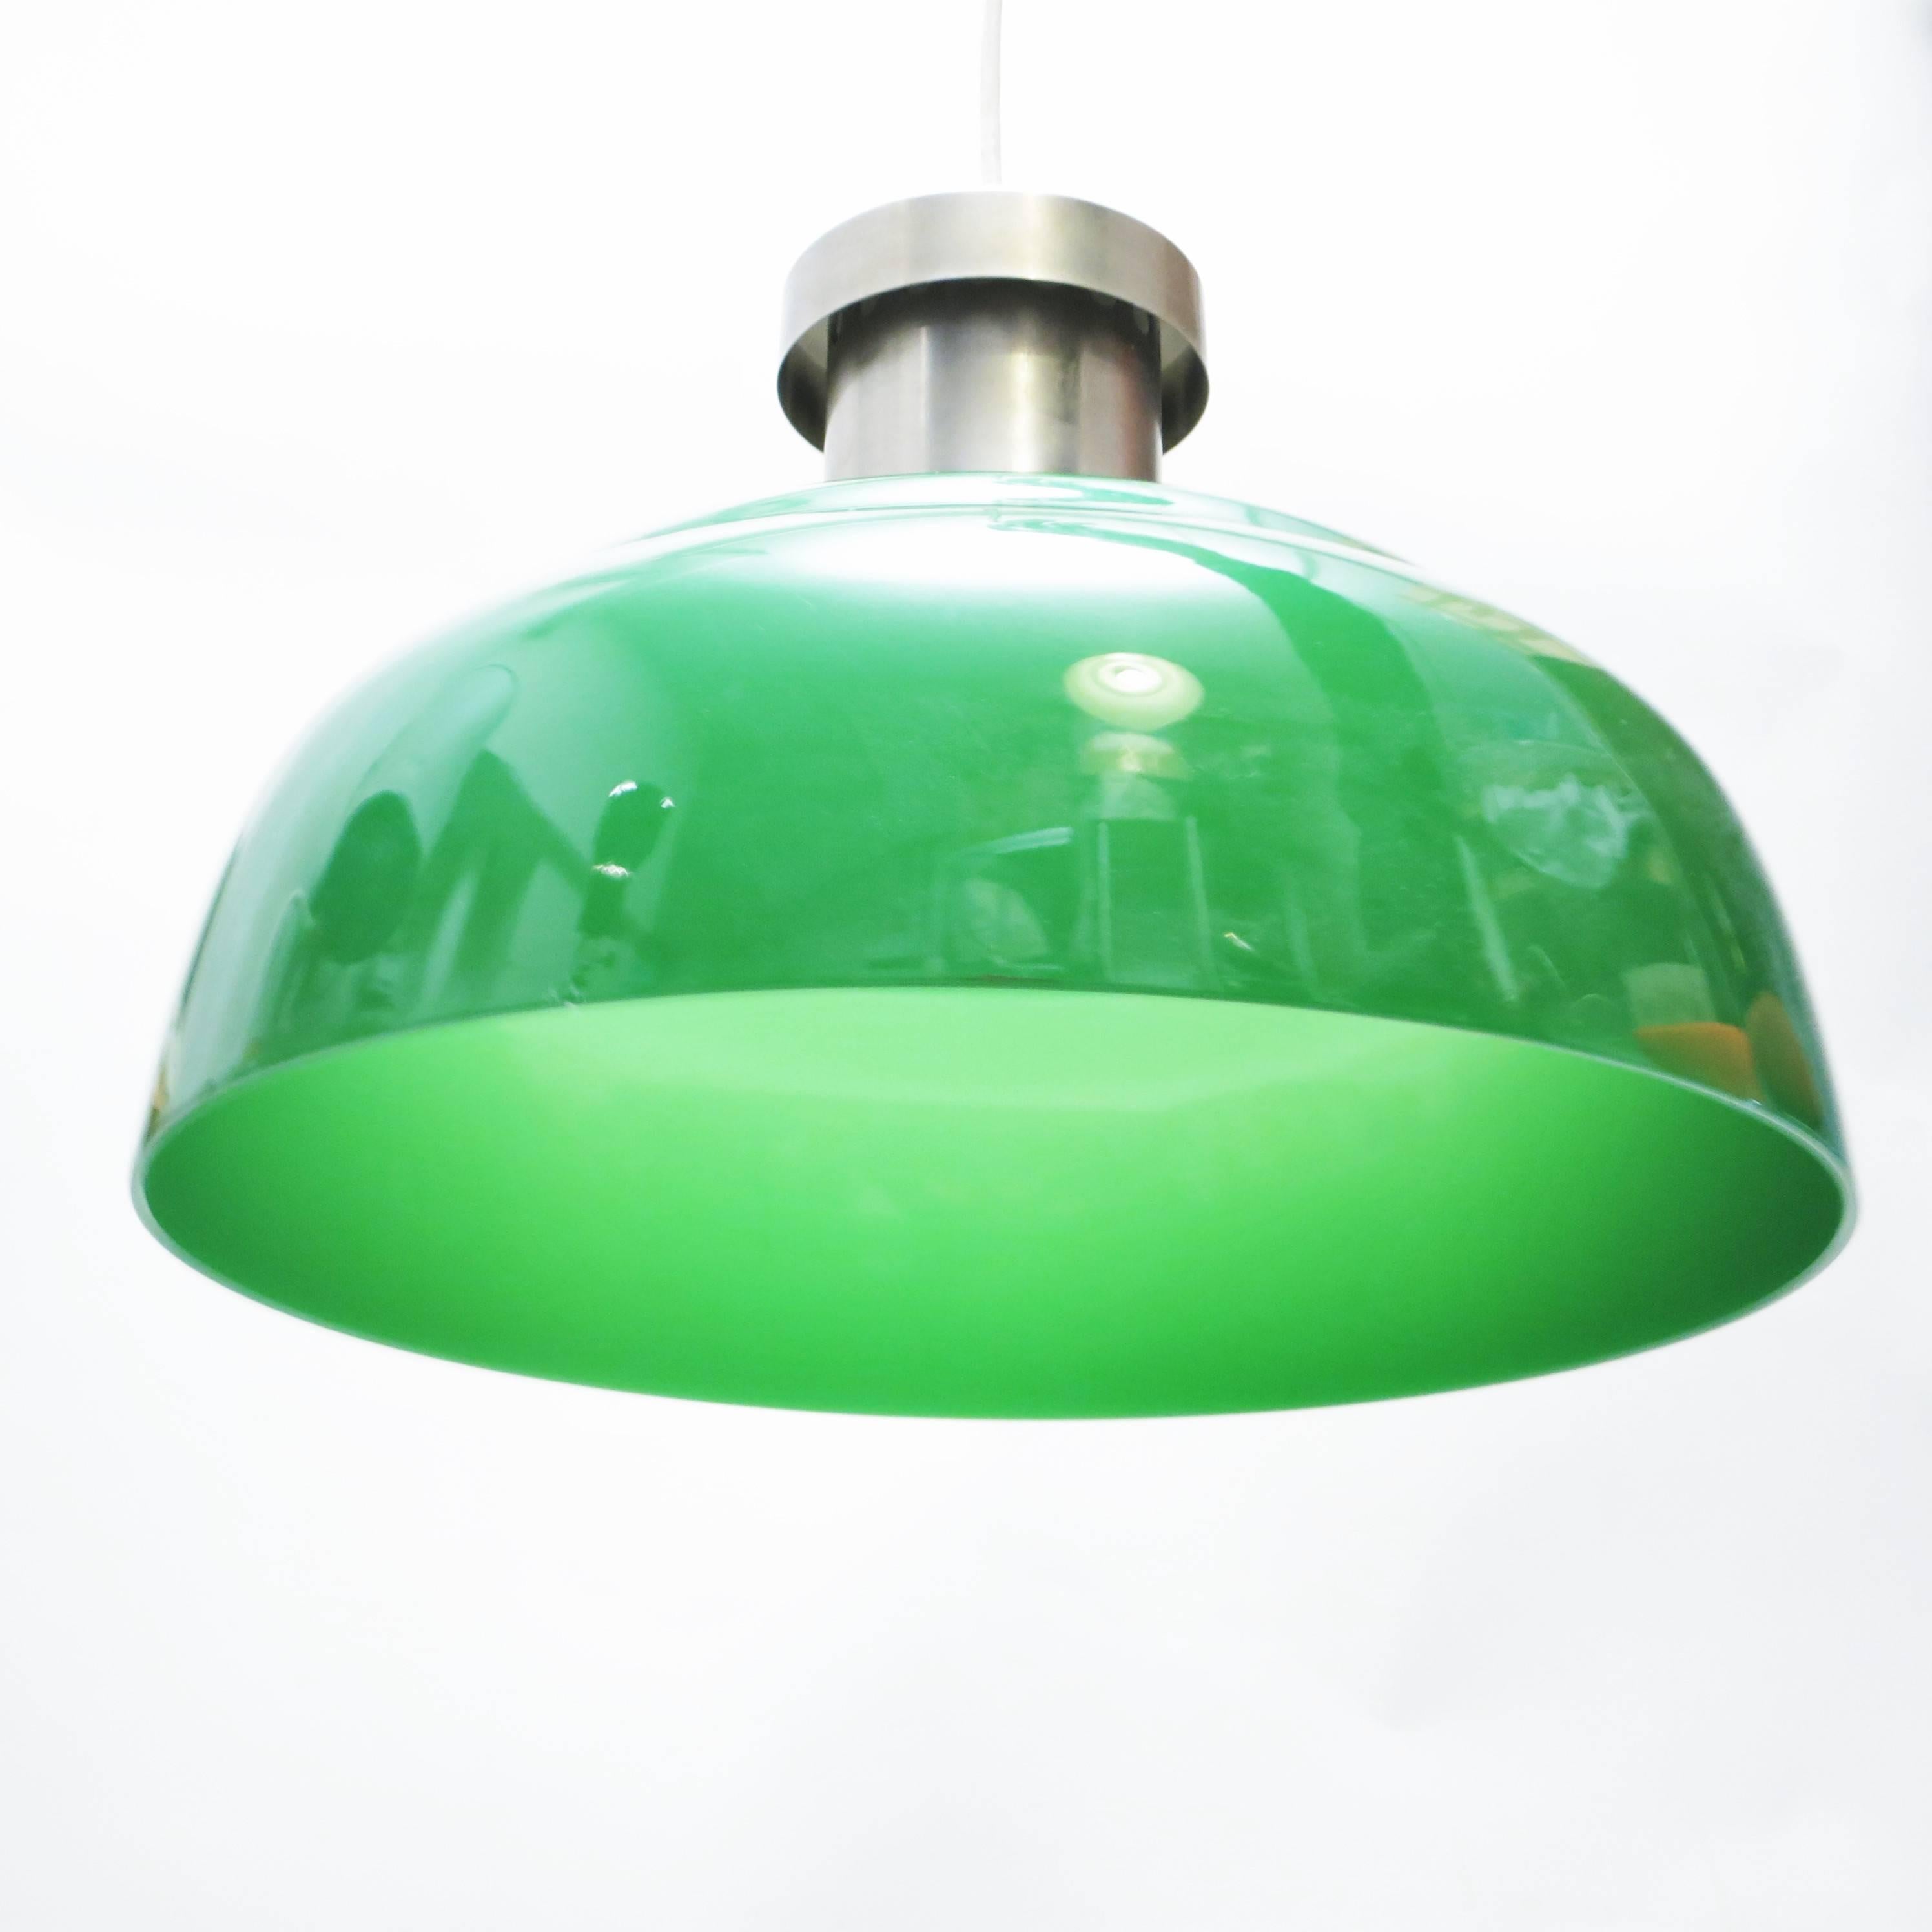 Mid-20th Century Green Hanging Lamp KD7 by Achille and Pier Giacomo Castiglioni for Kartell, 1959